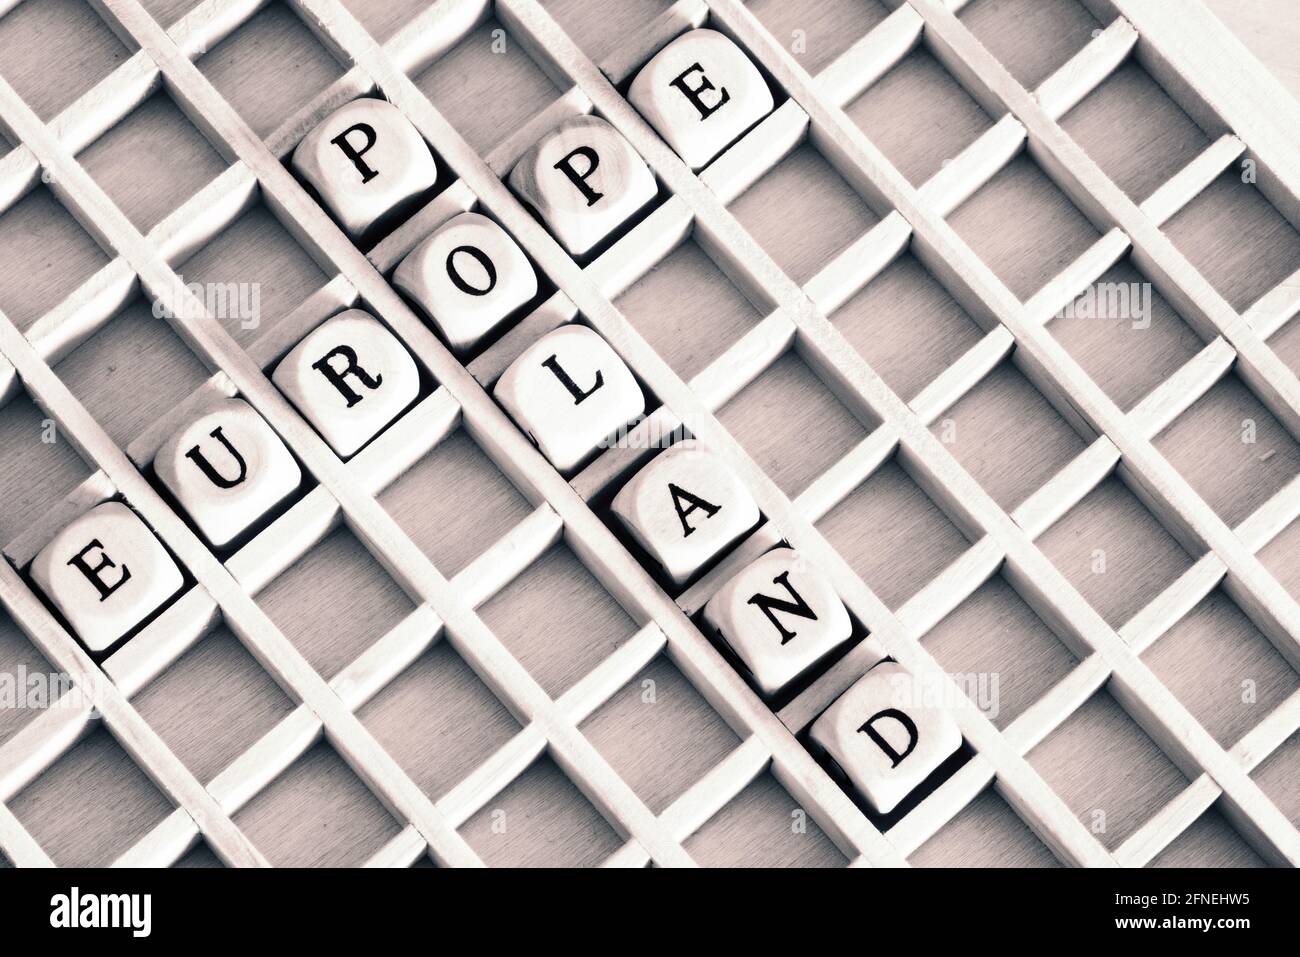 Words Poland and Europe Stock Photo